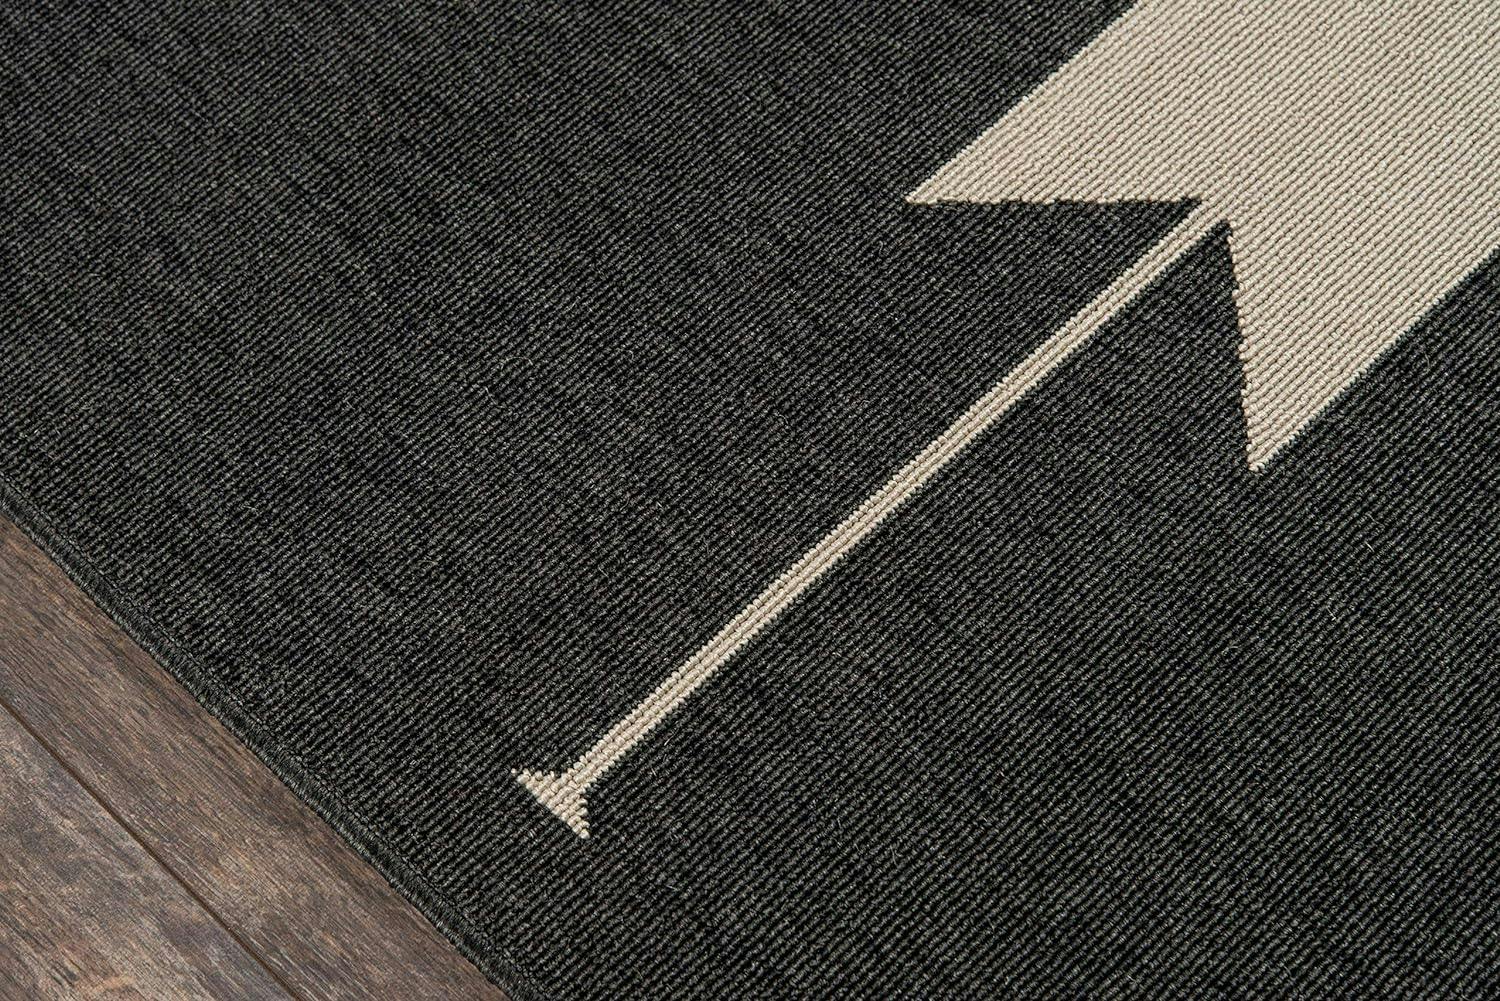 Contemporary Charcoal Gray Geometric Outdoor Rug, 8'6" x 13'